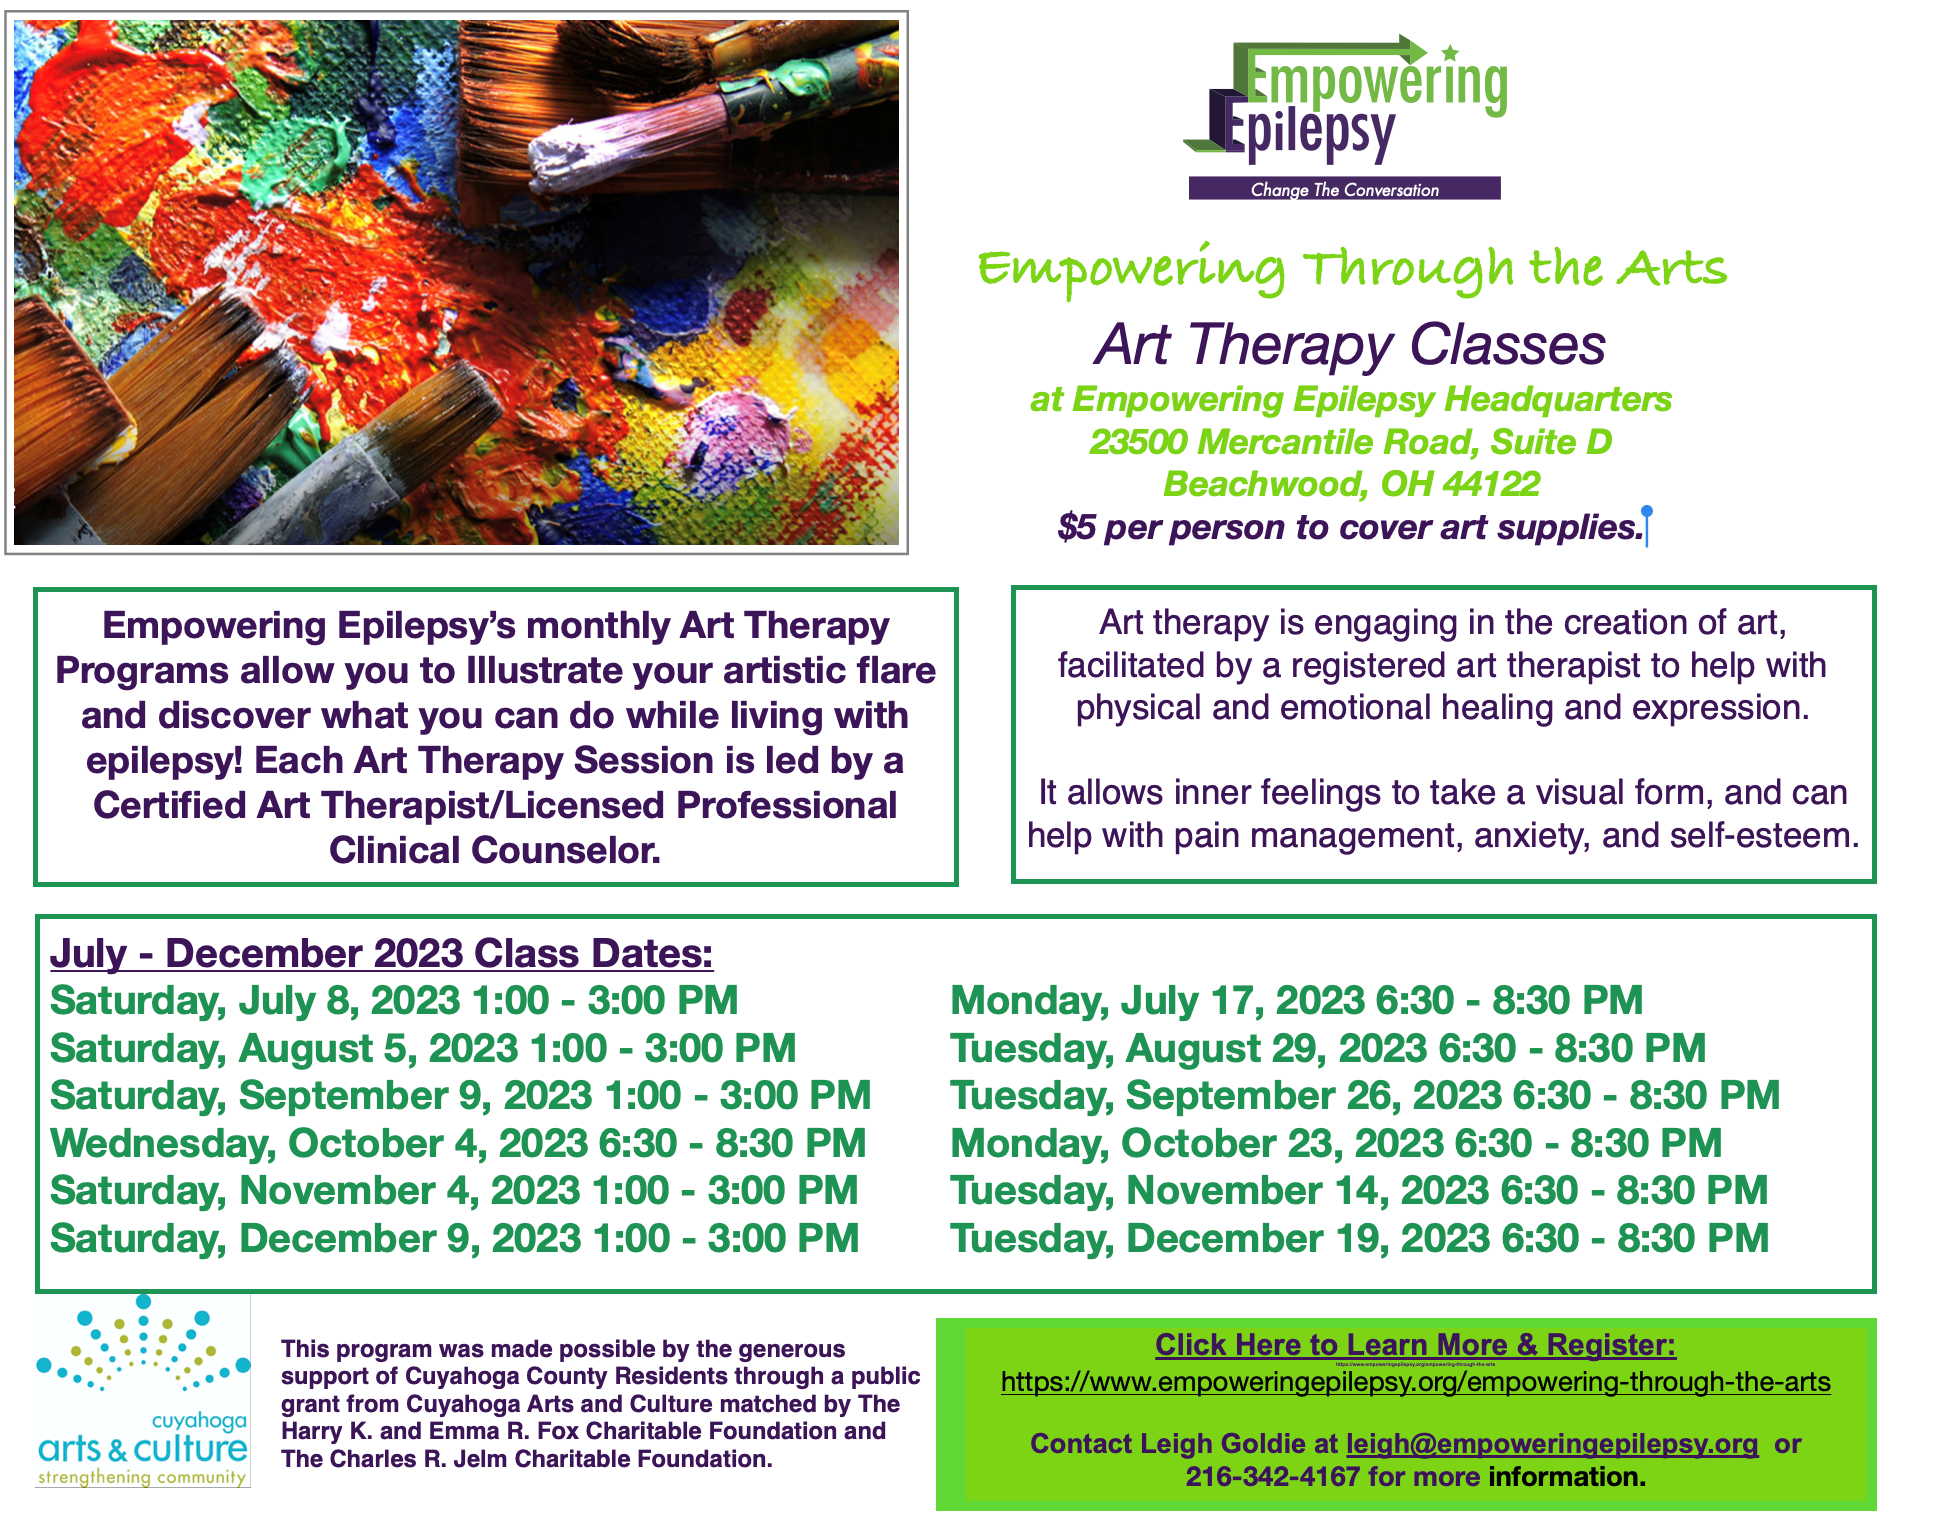 Art Therapy Class - Empowering Through the Arts